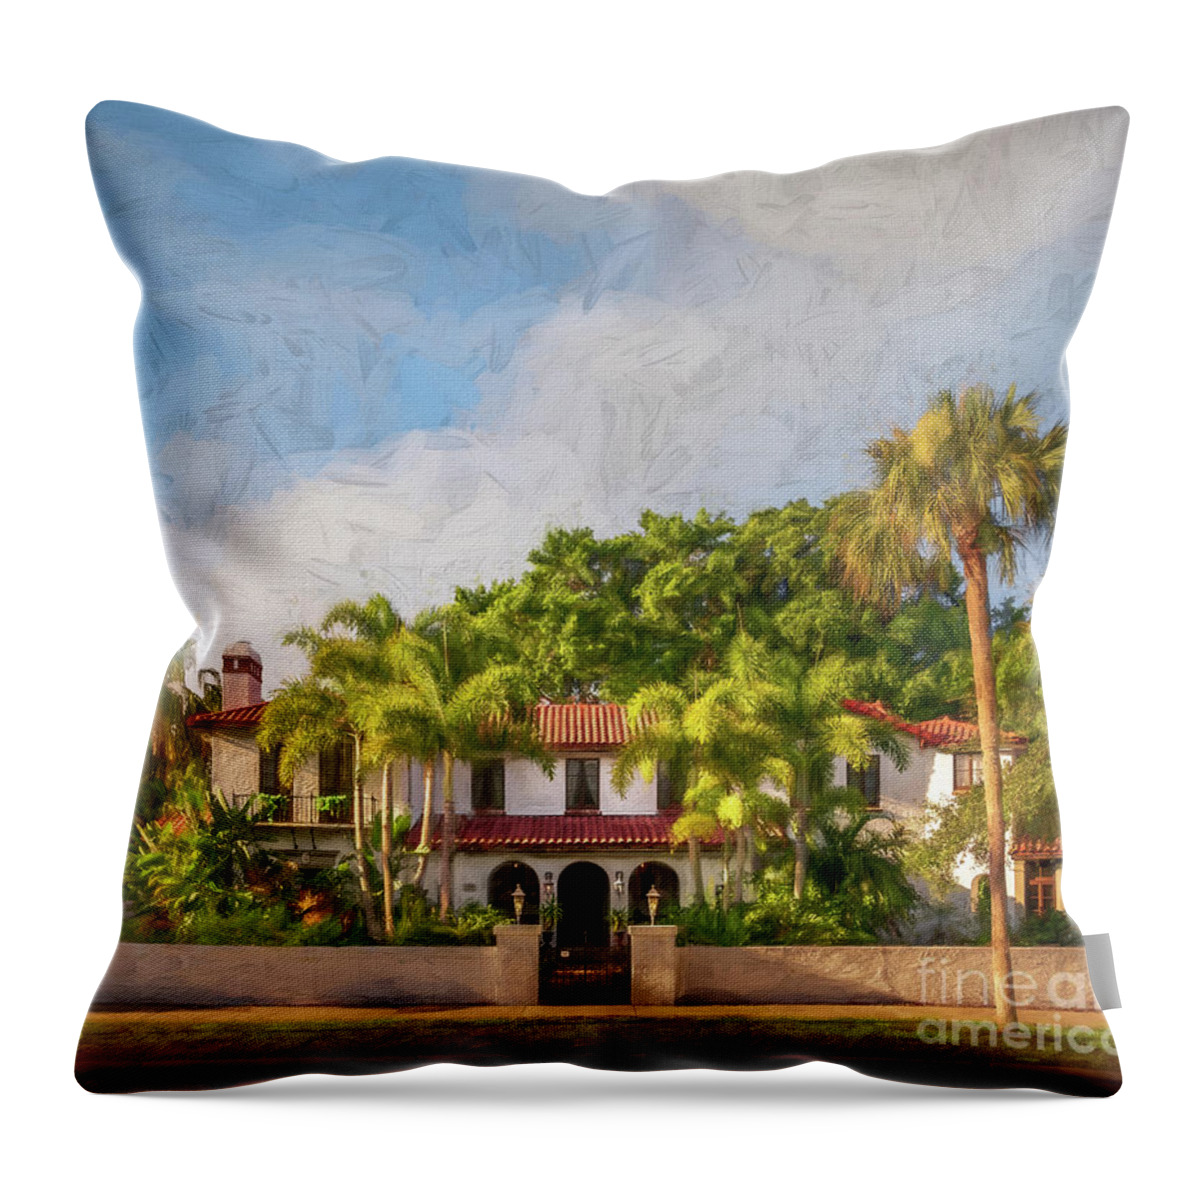 613 W Venice Ave Throw Pillow featuring the photograph 613 W Venice Ave, Venice, Florida, Painterly 3 by Liesl Walsh